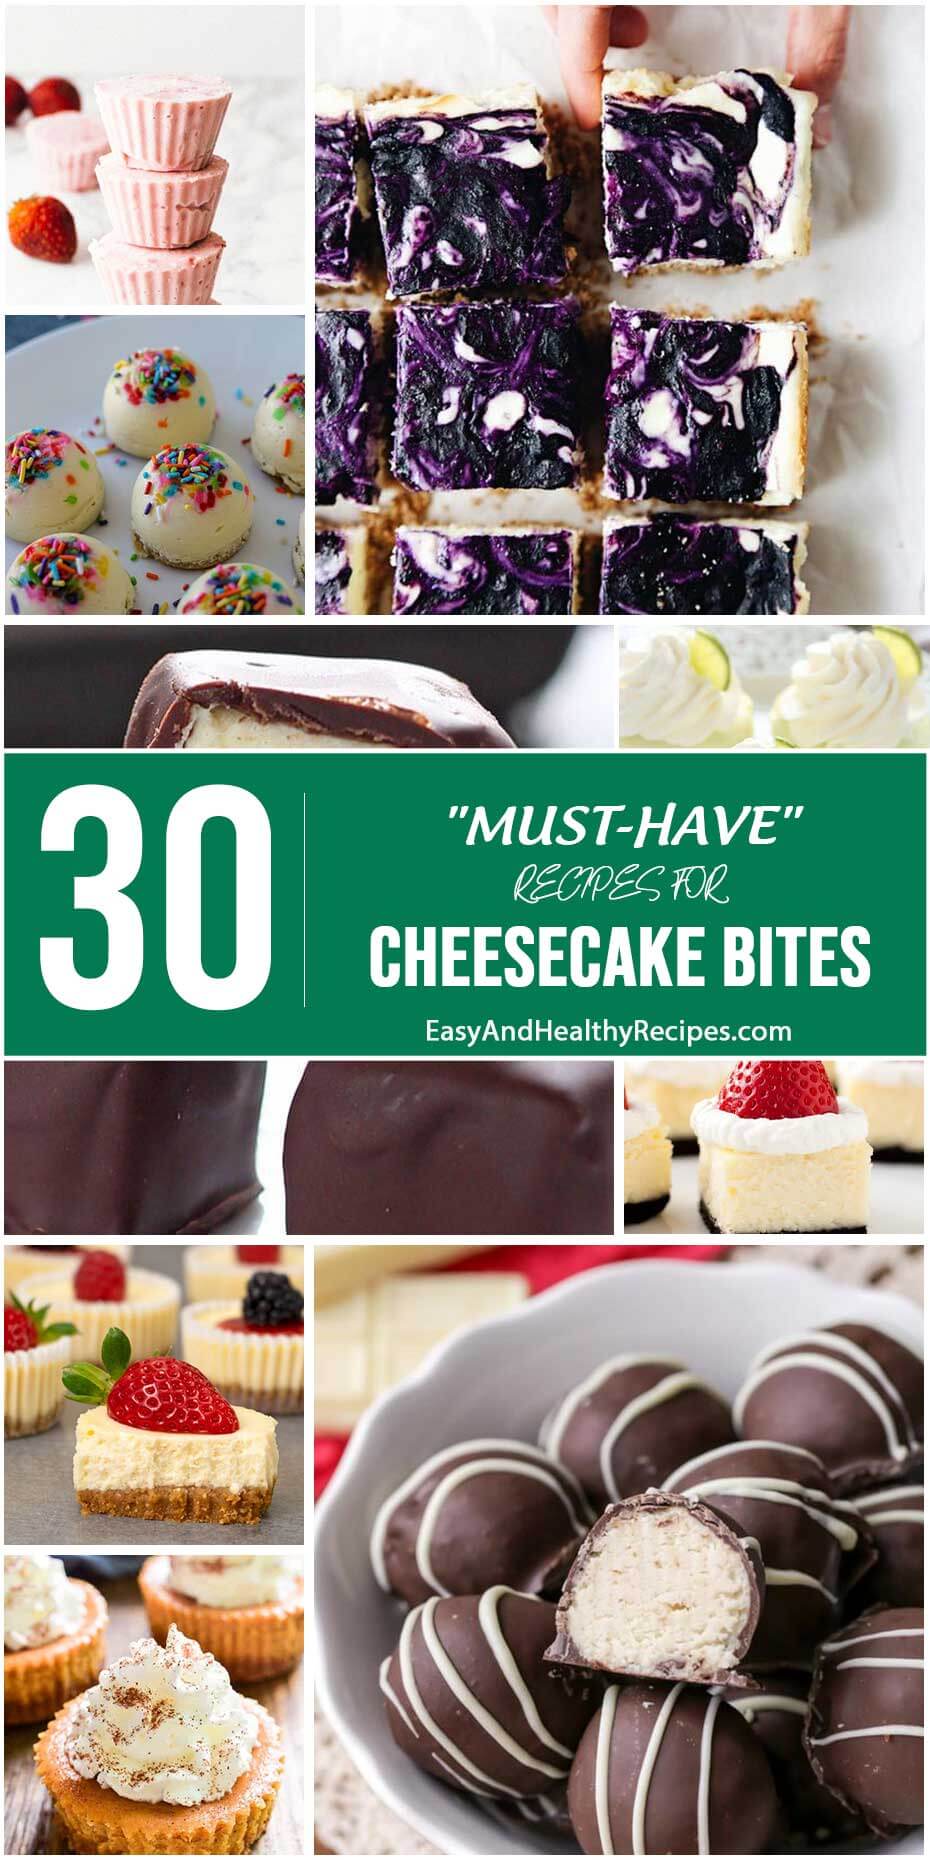 30 “Must-Have” Recipes For Cheesecake Bites, Cheesecake Bites